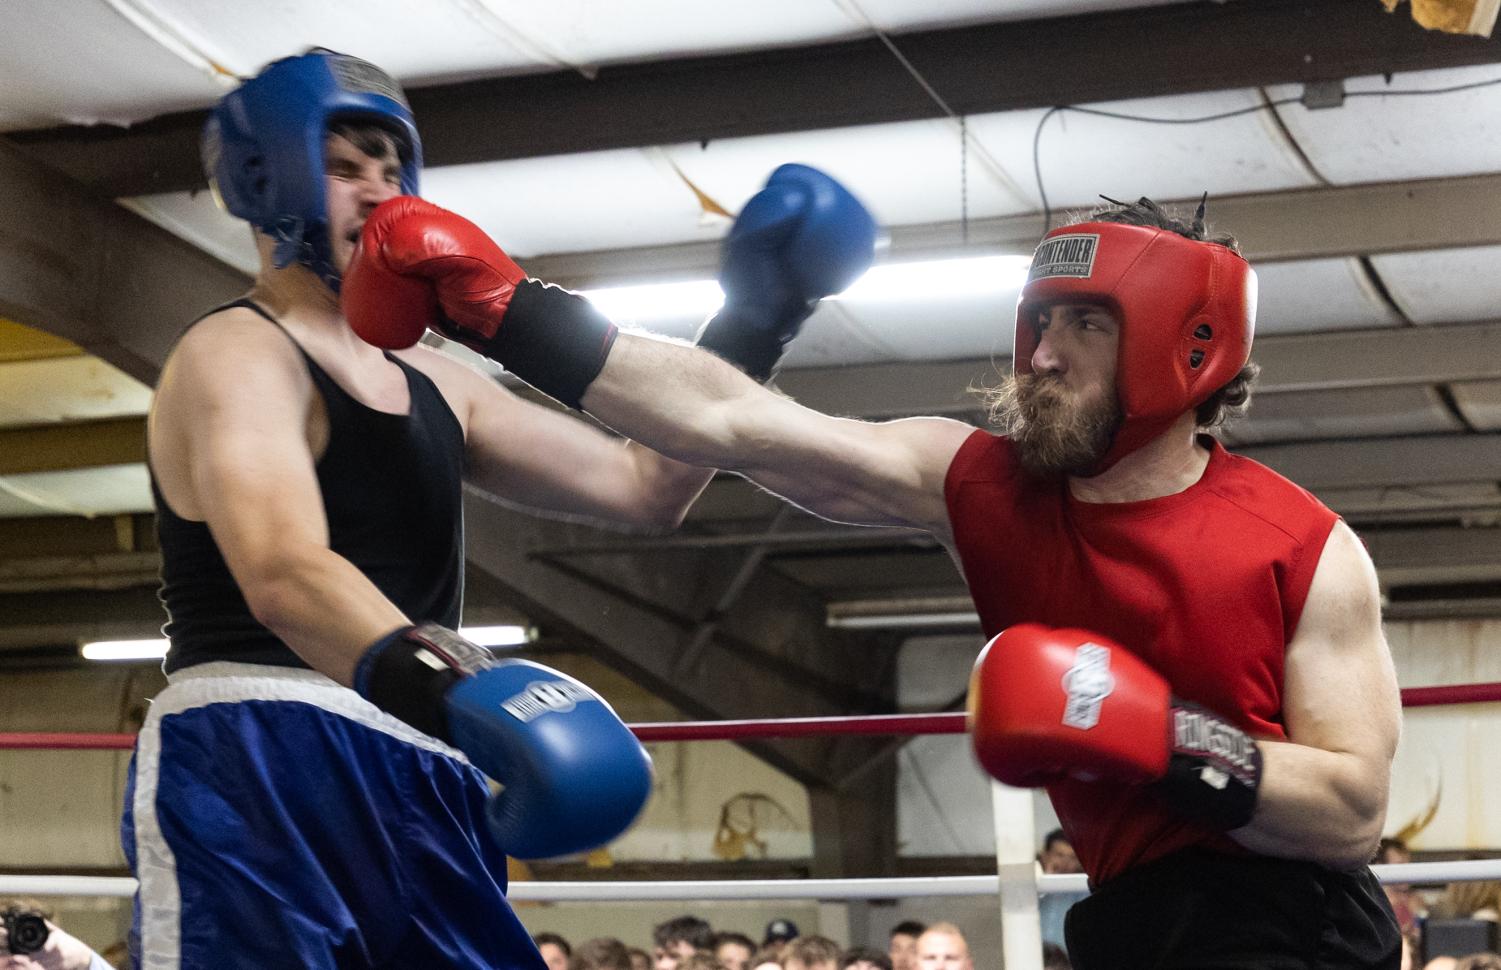 We take pride in this Sigma Chi fraternity hosts annual Fight Night